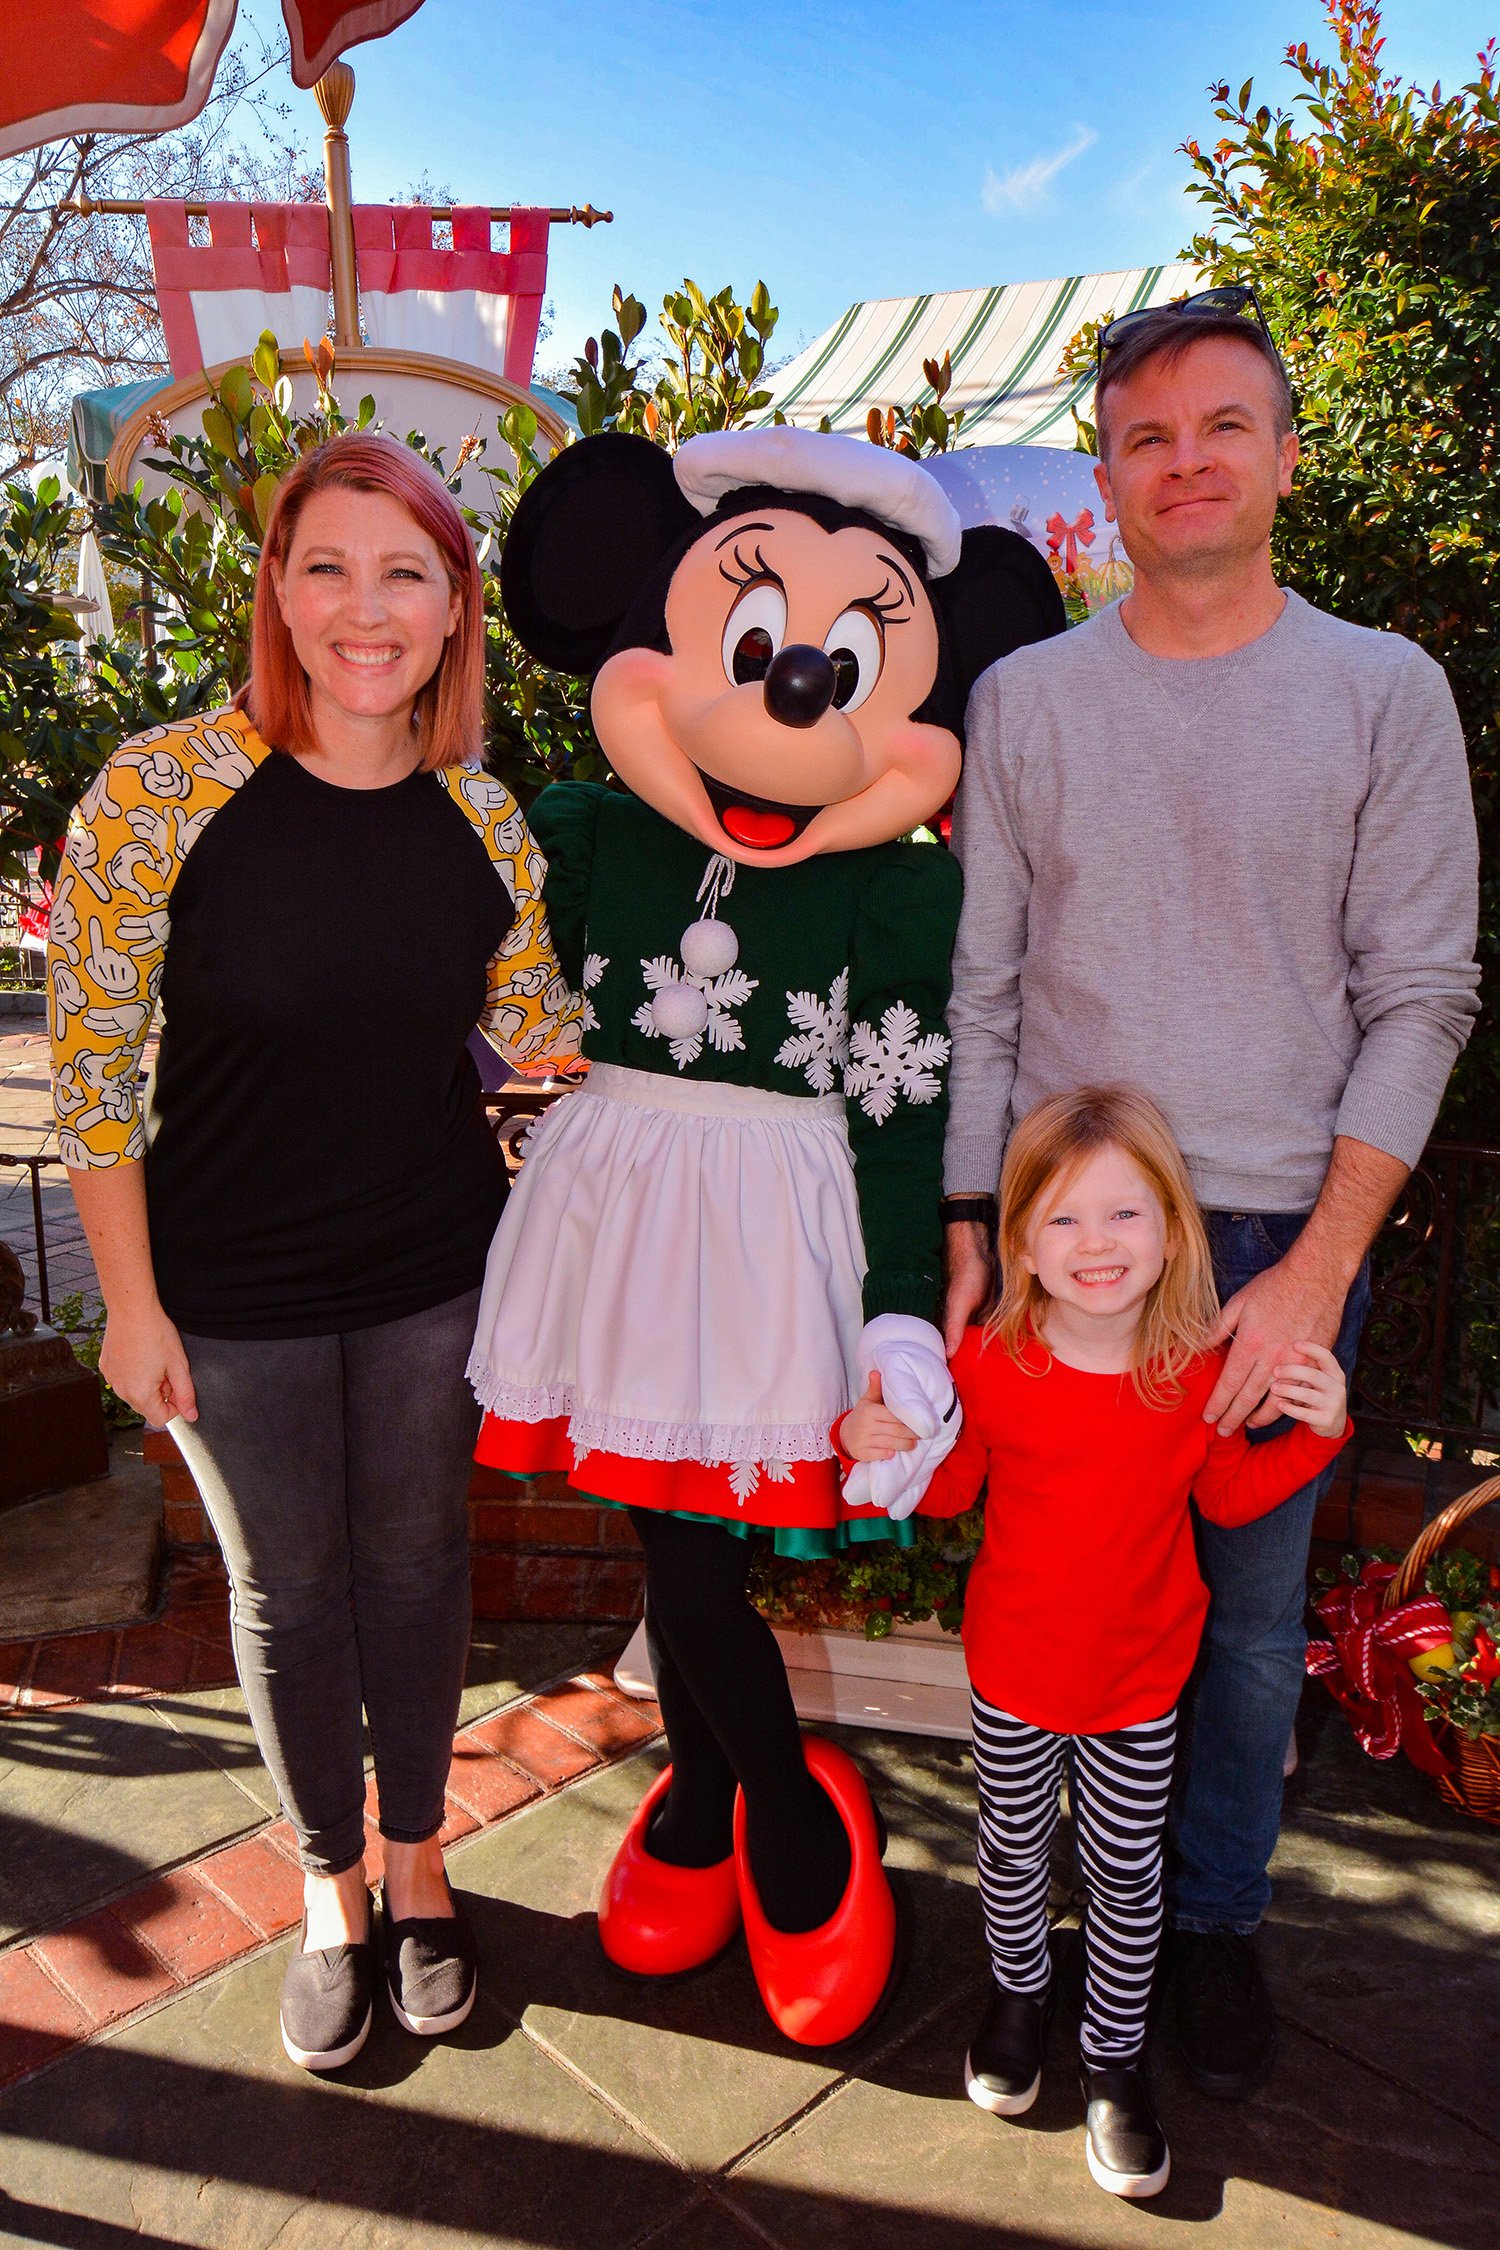 Disneyland Character Dining: This article shares everything you need to know about Minnie and Friends - Breakfast in the Park. From prices to timing to food items, it's all in this article.....a must read for Disneyland trip planning!